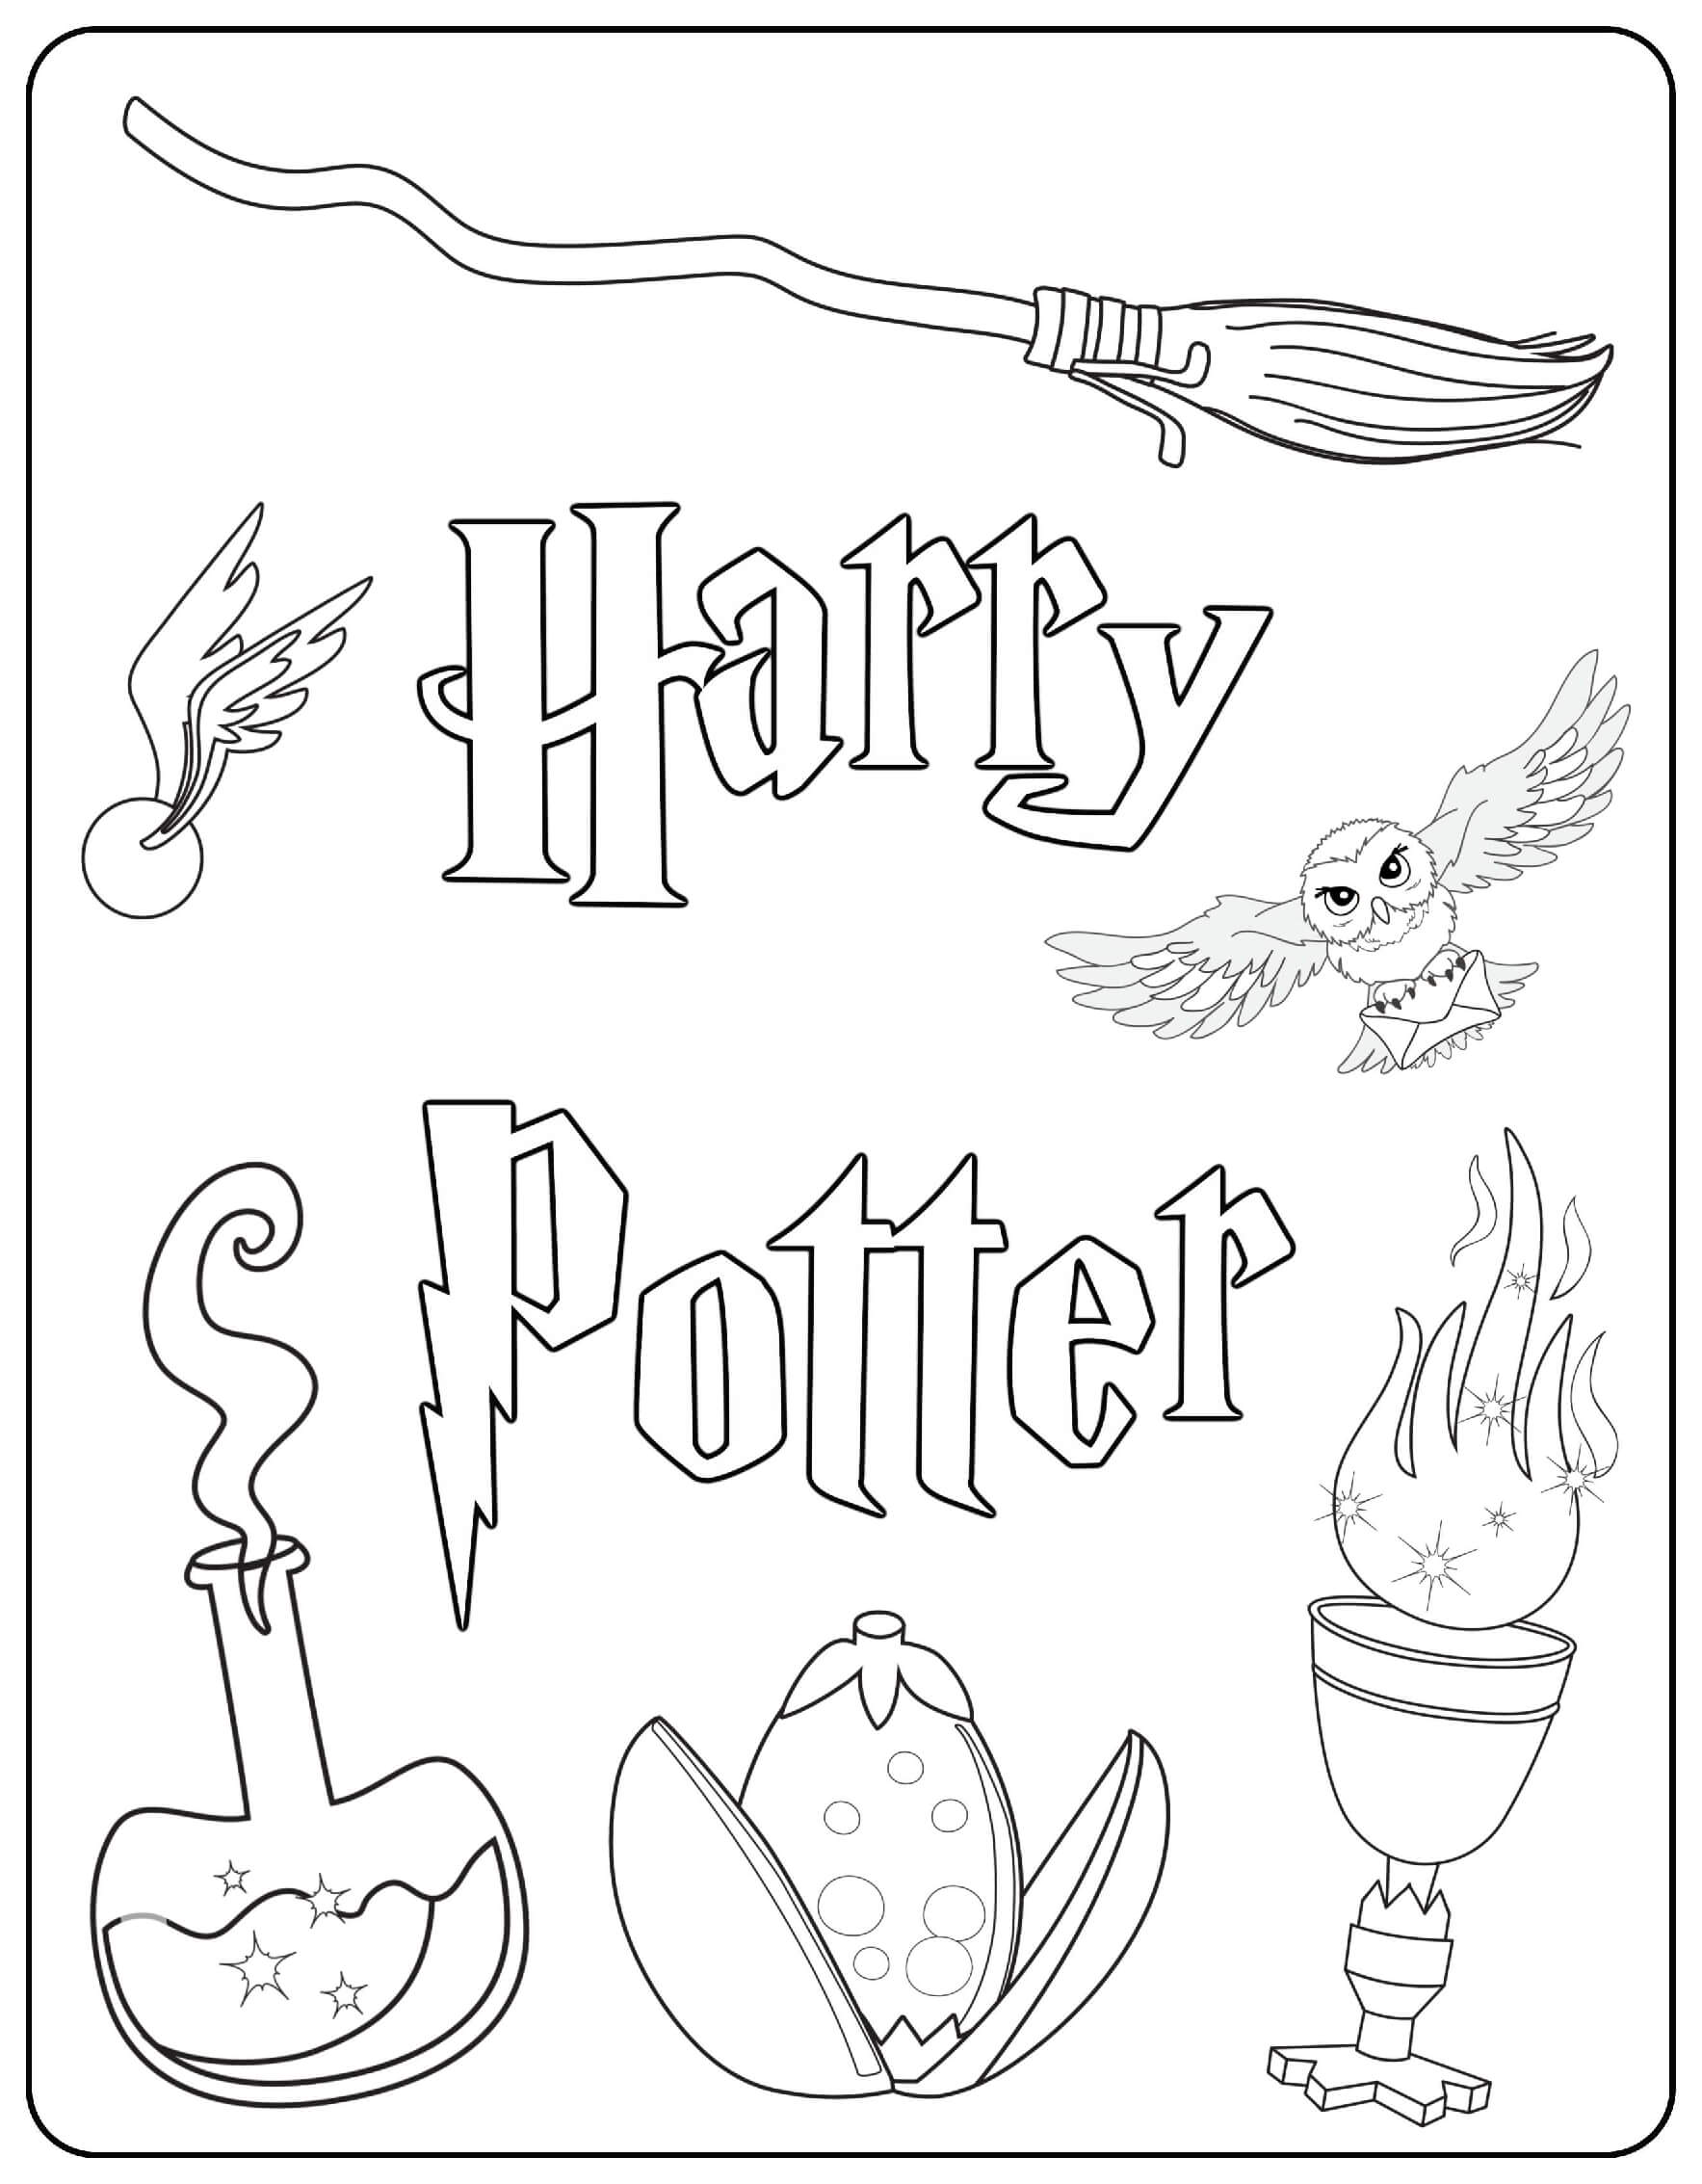 Harry Potter Images Coloring Page